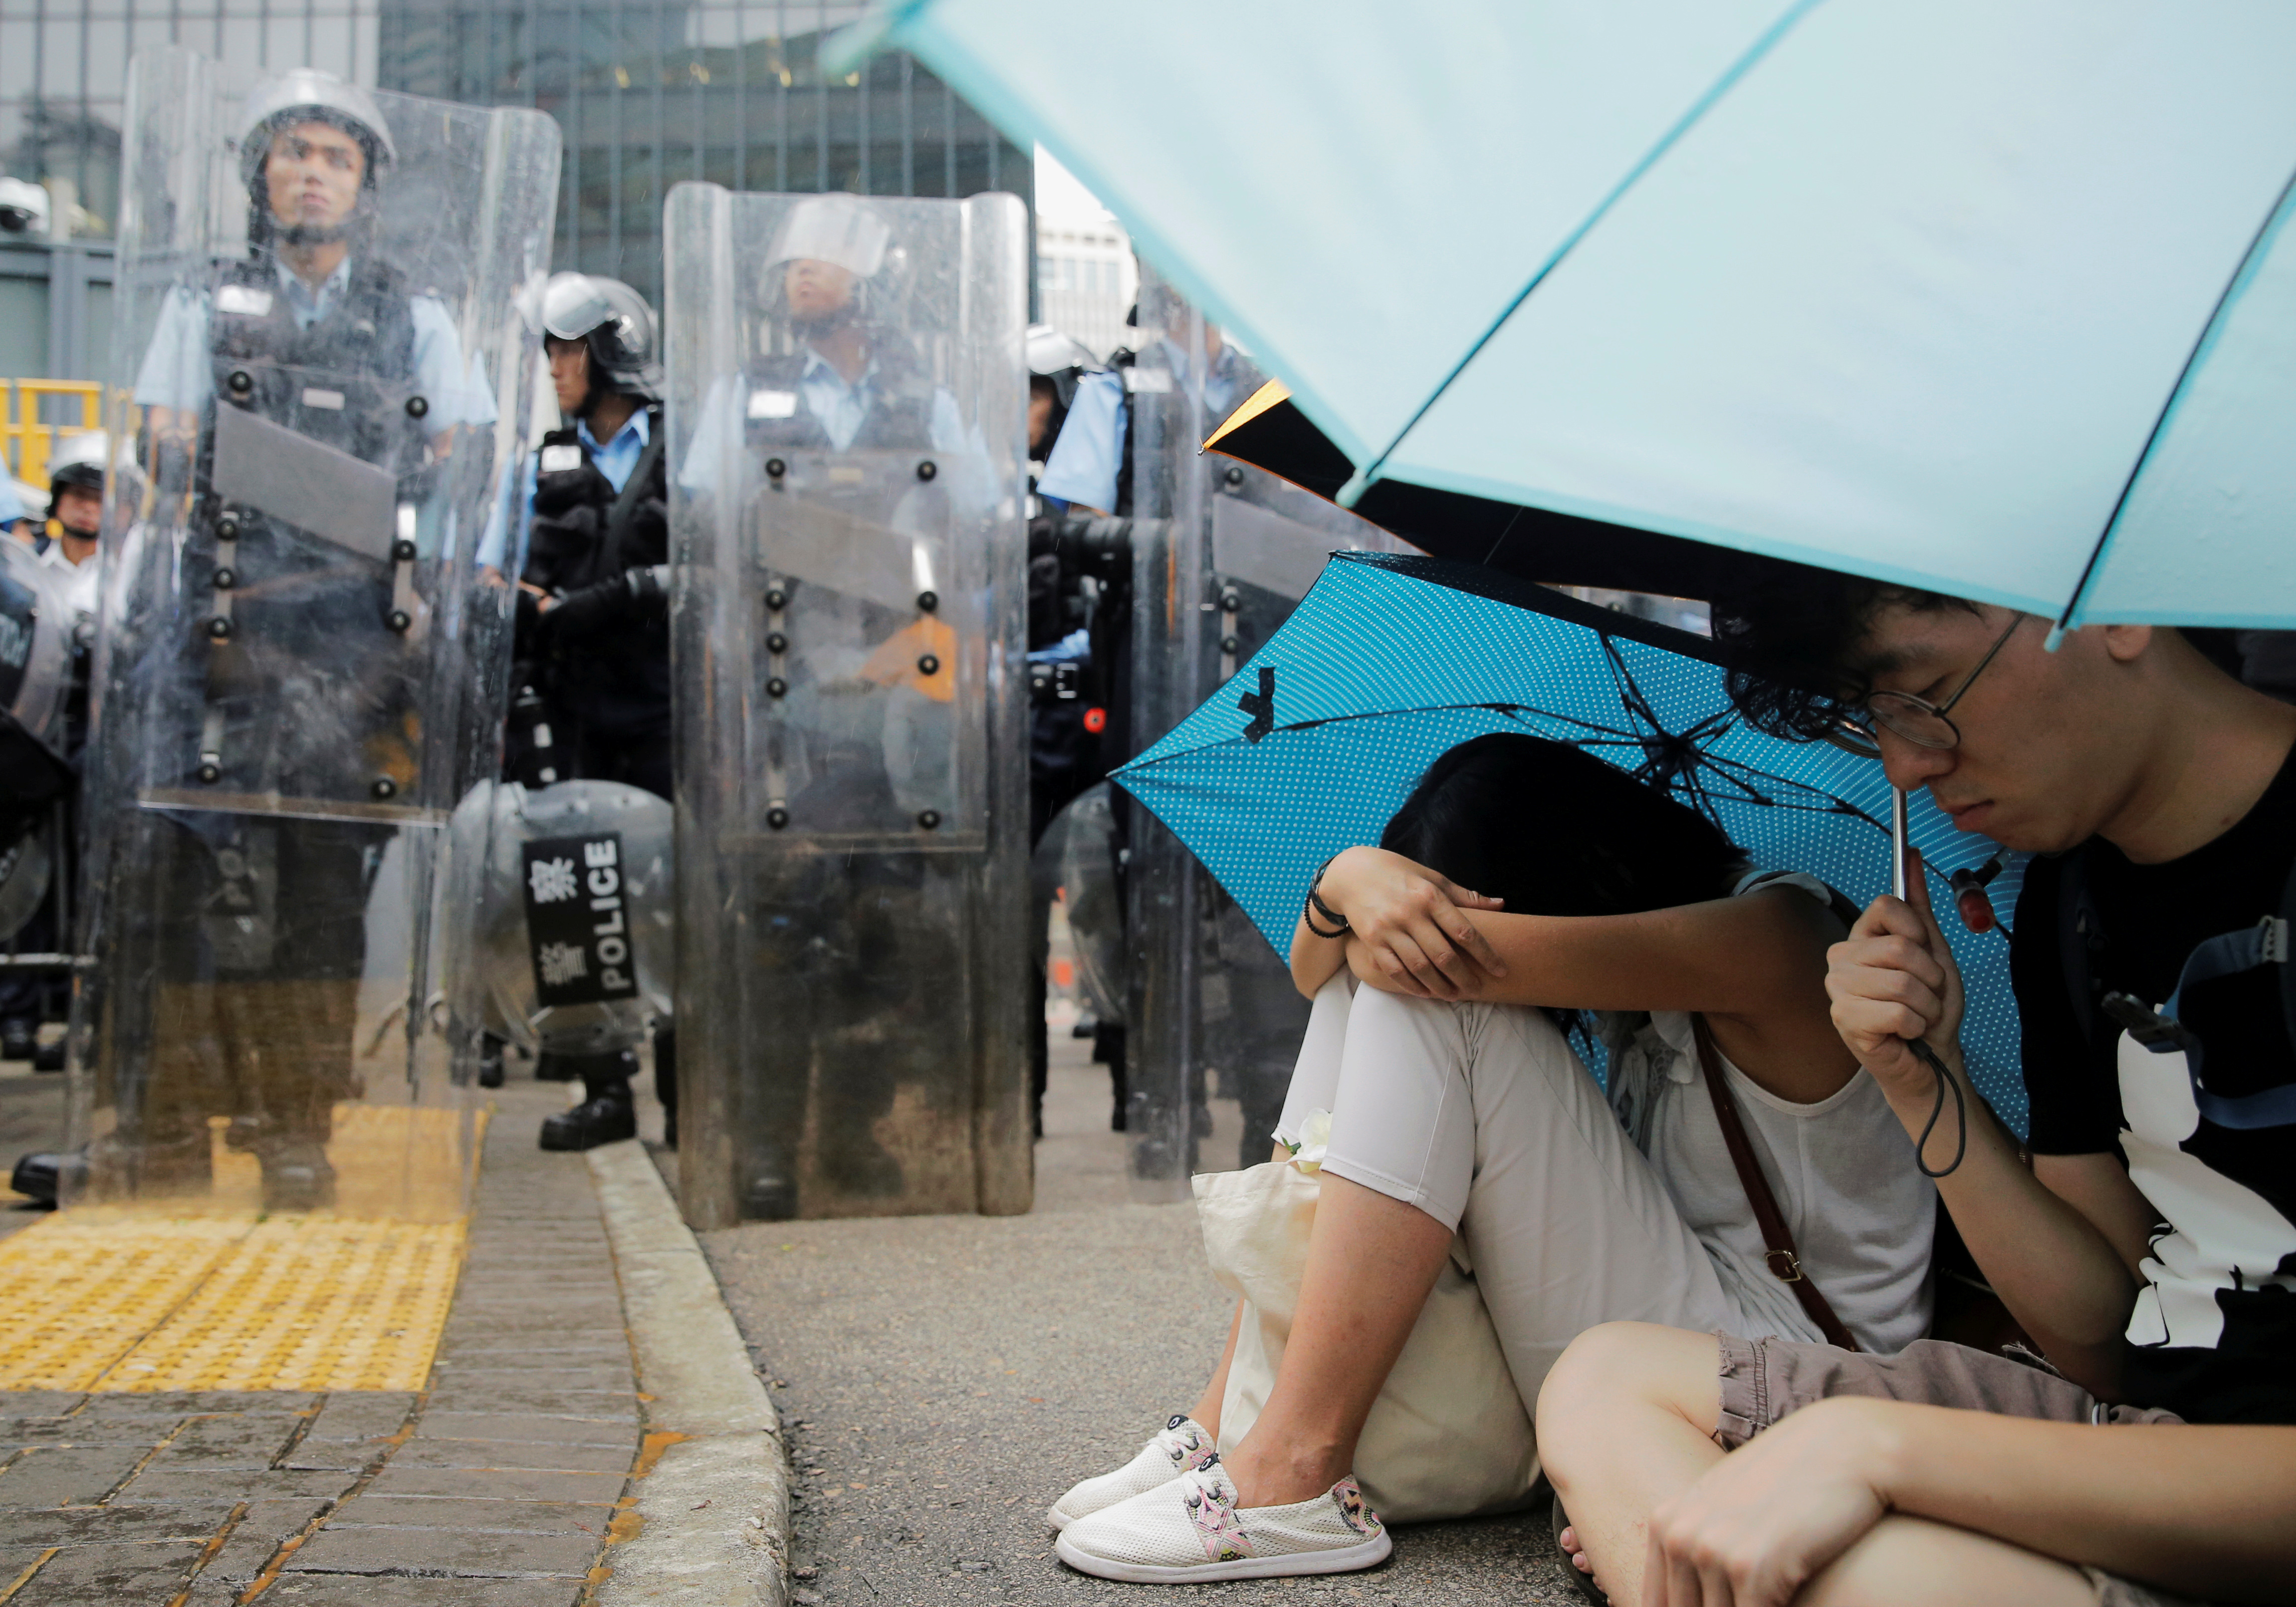 Demonstration against a proposed extradition bill in Hong Kong